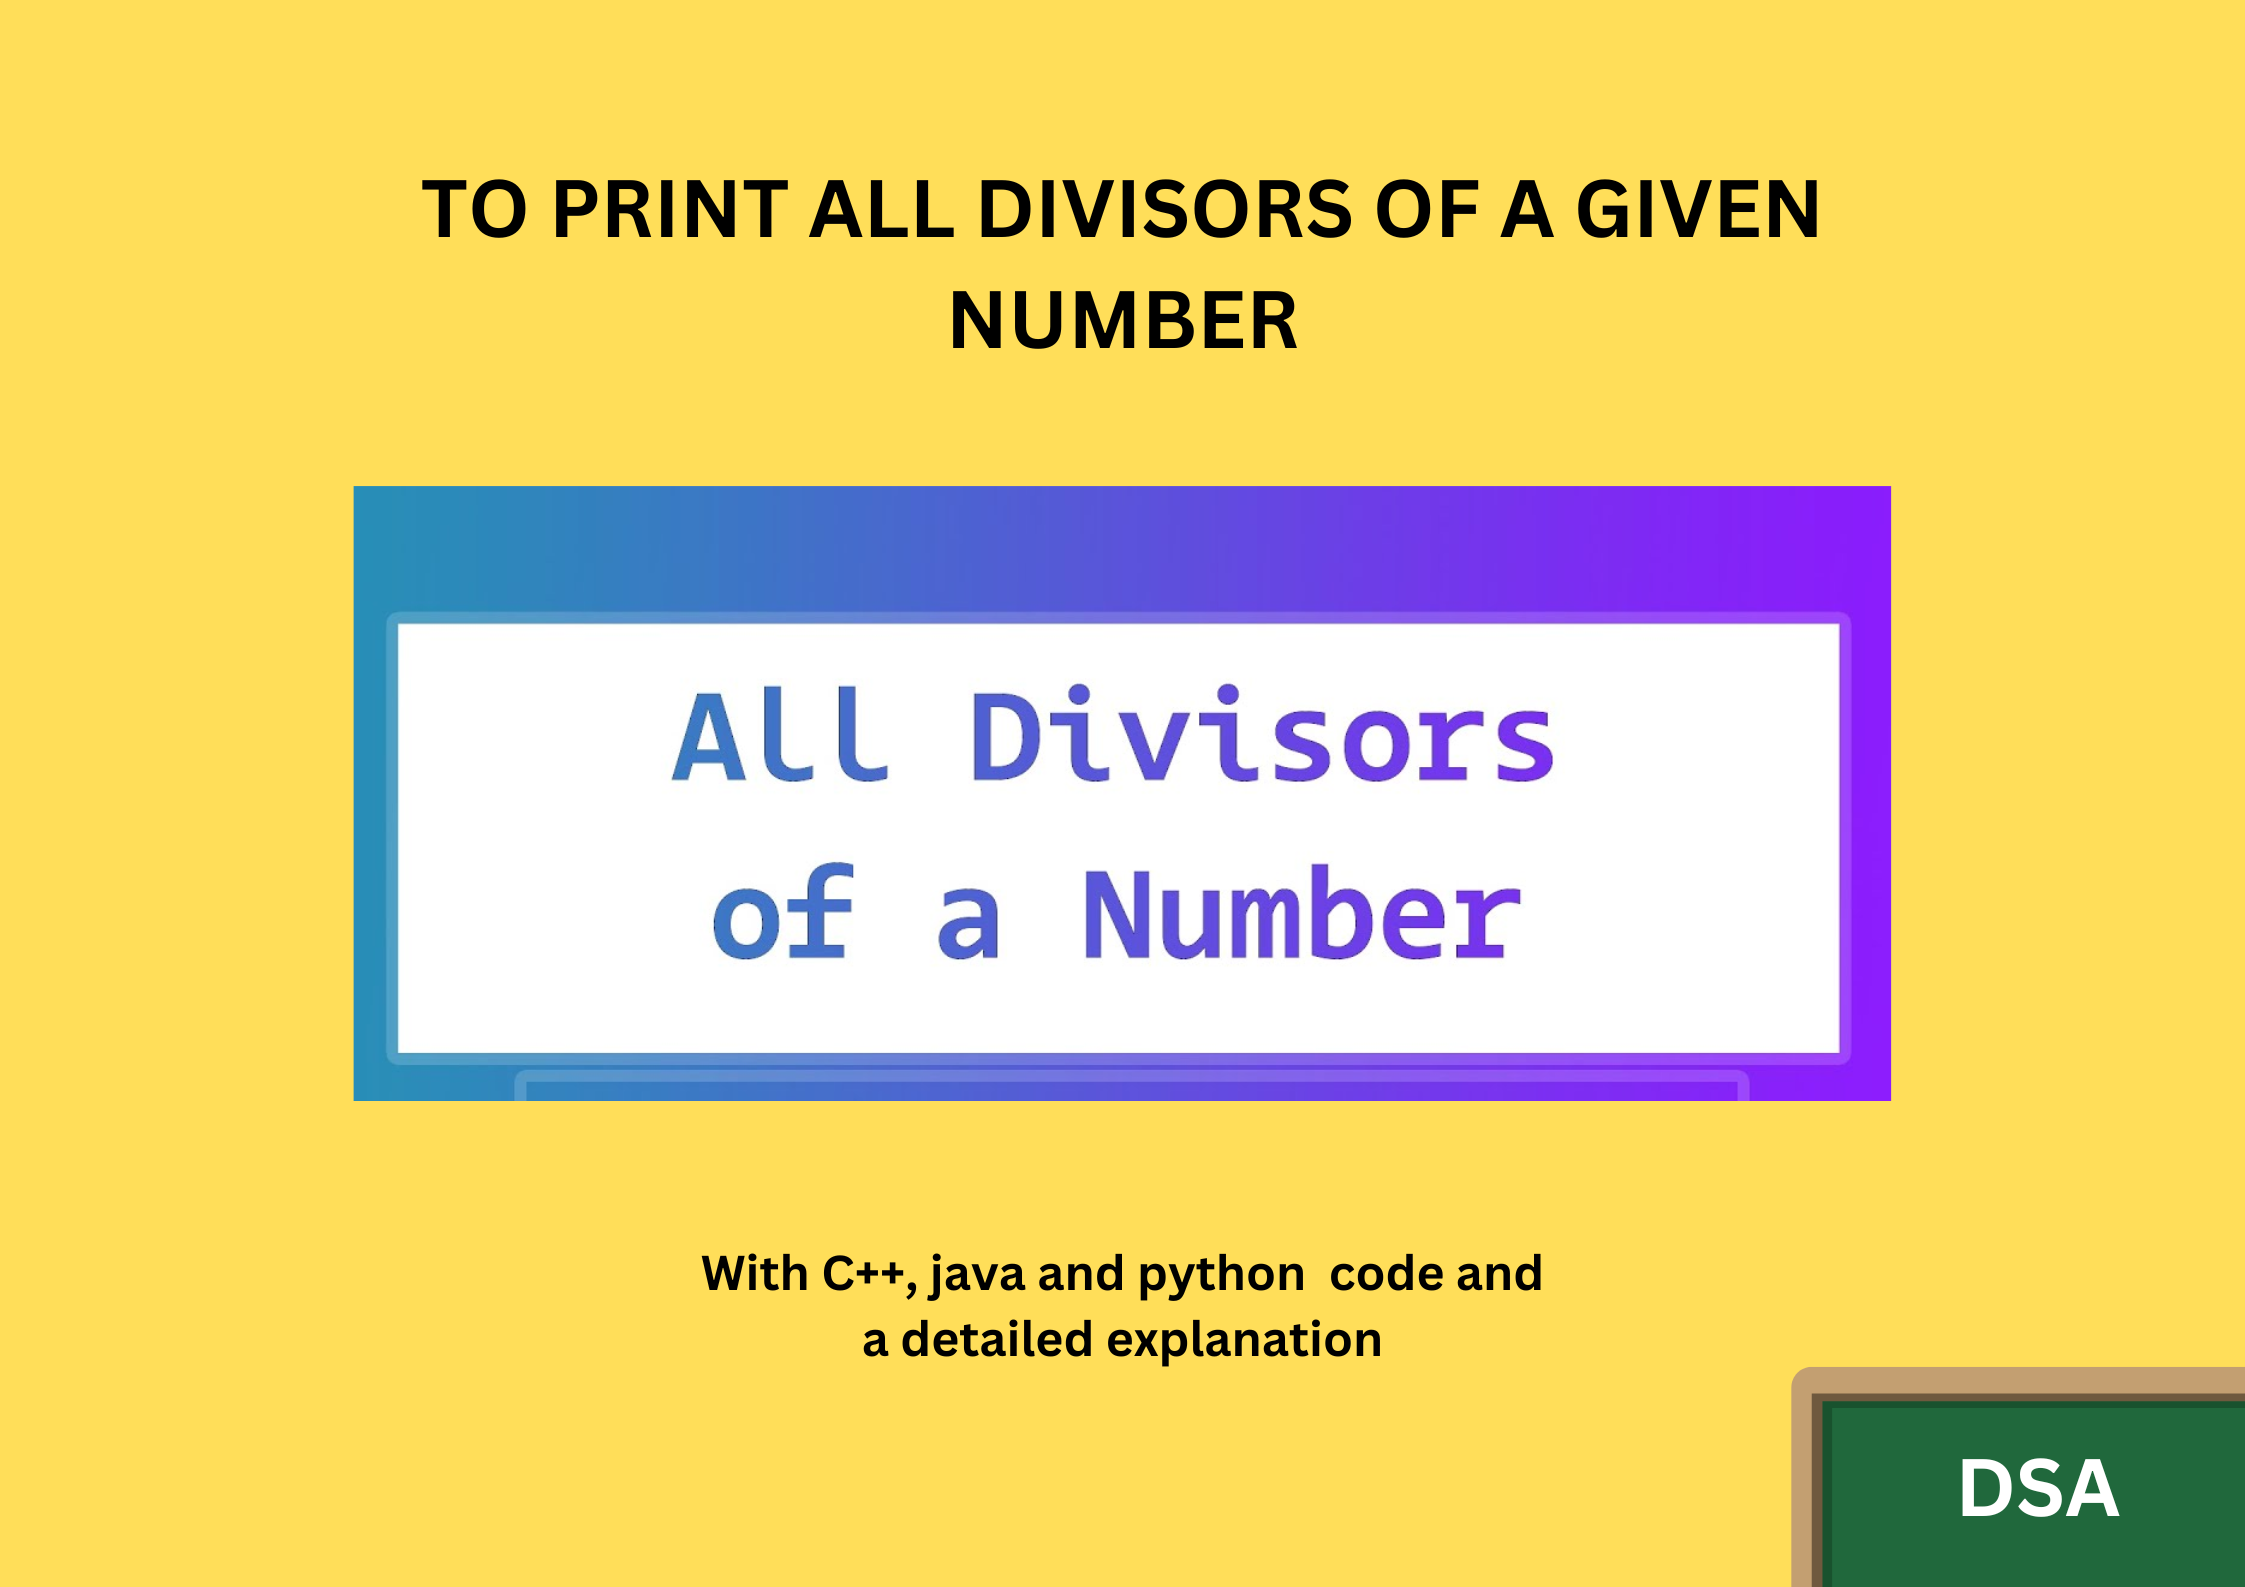 TO PRINT ALL DIVISORS OF A GIVEN NUMBER